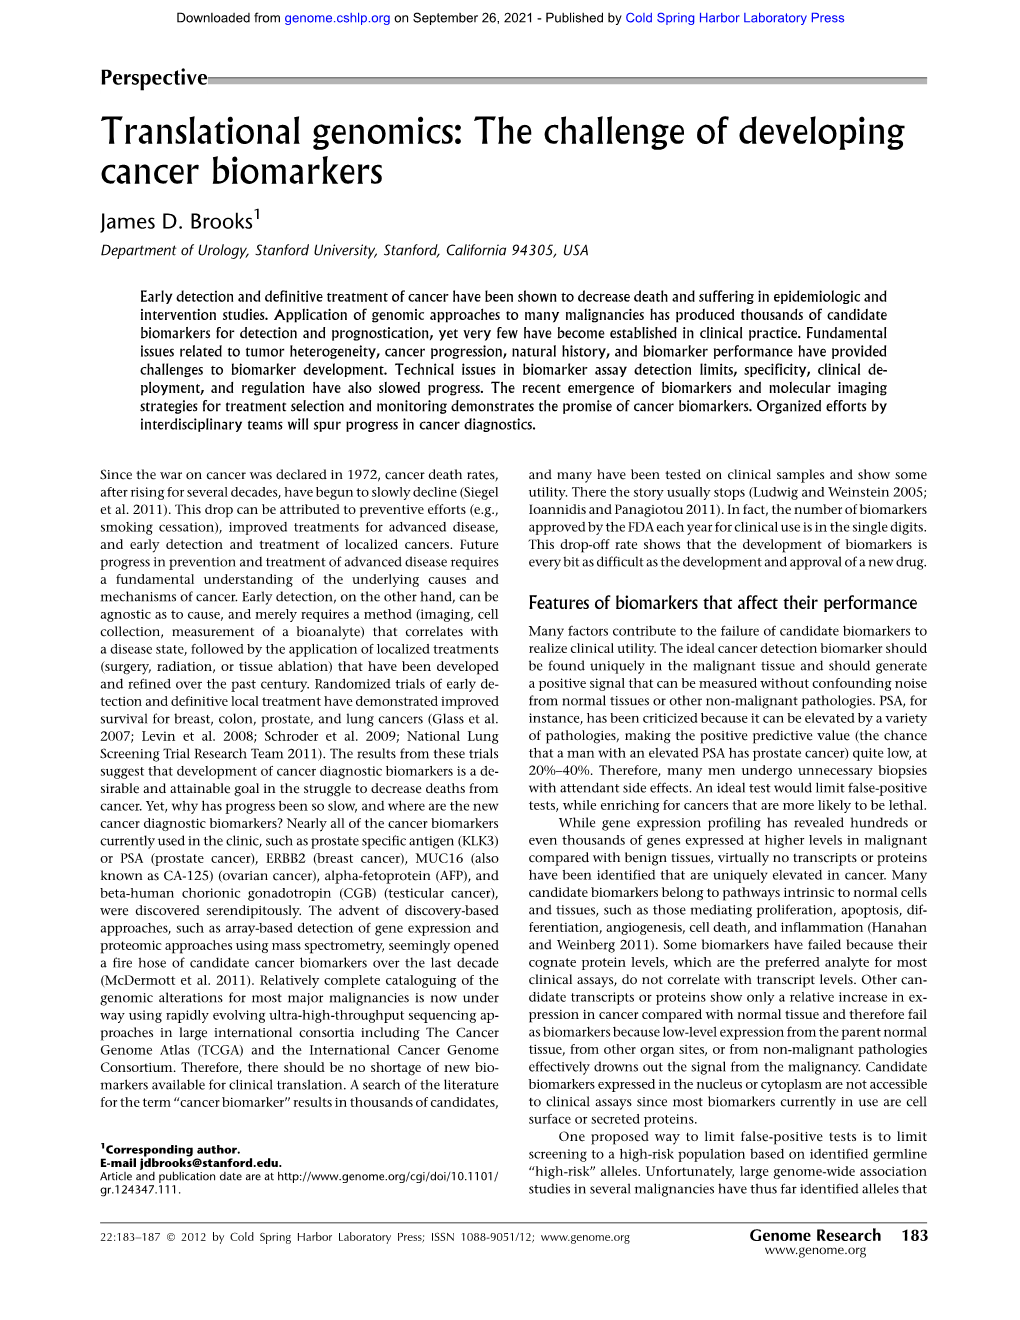 The Challenge of Developing Cancer Biomarkers